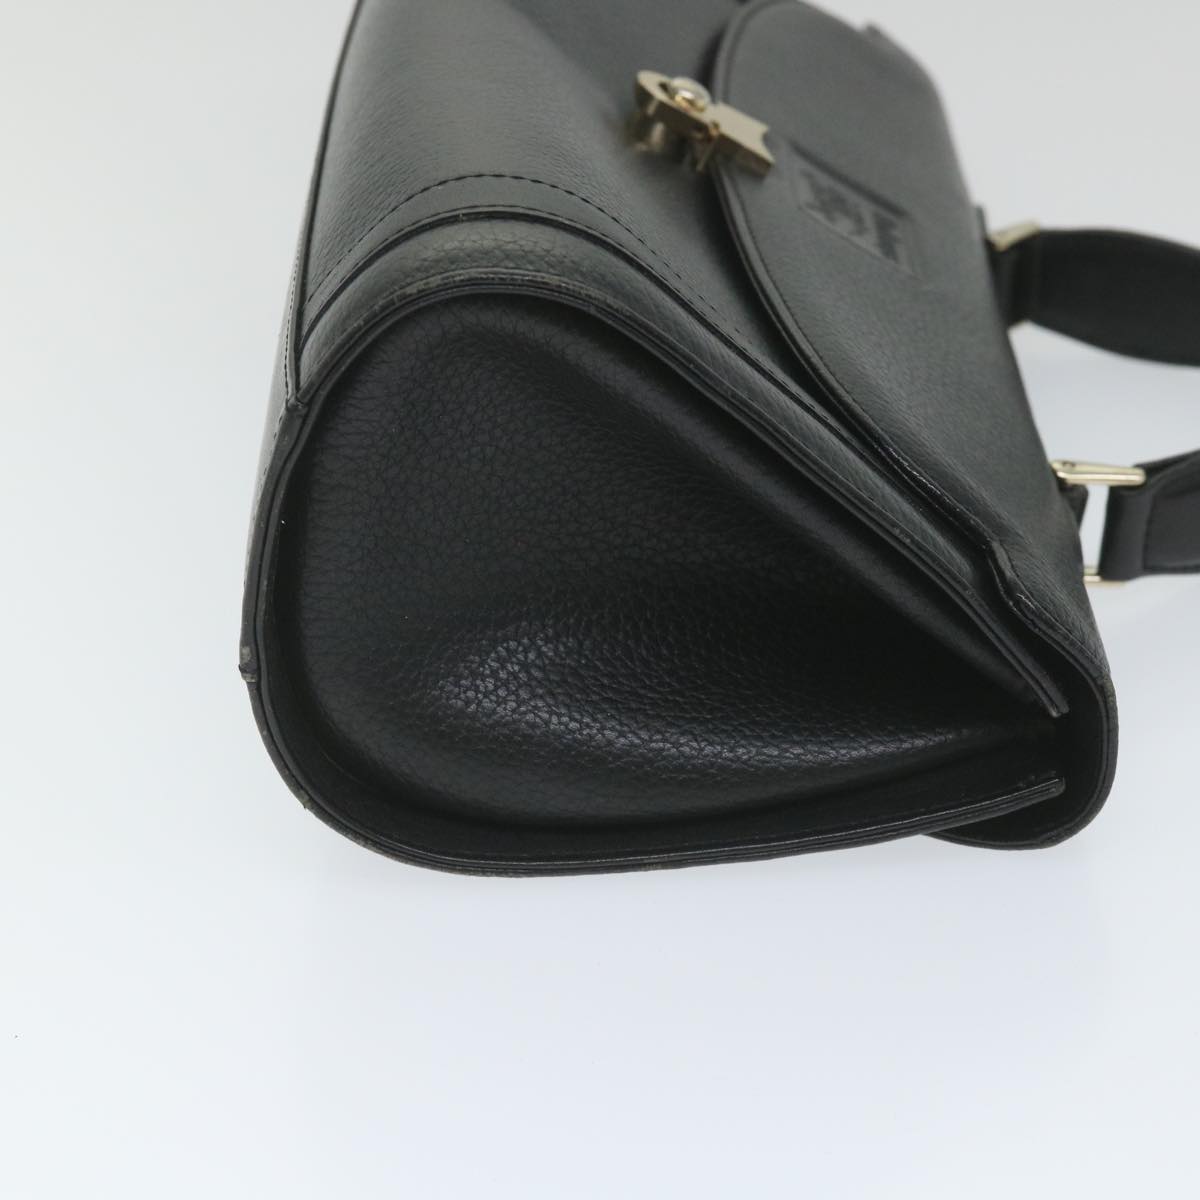 Burberrys Hand Bag Leather Black Auth ep2130